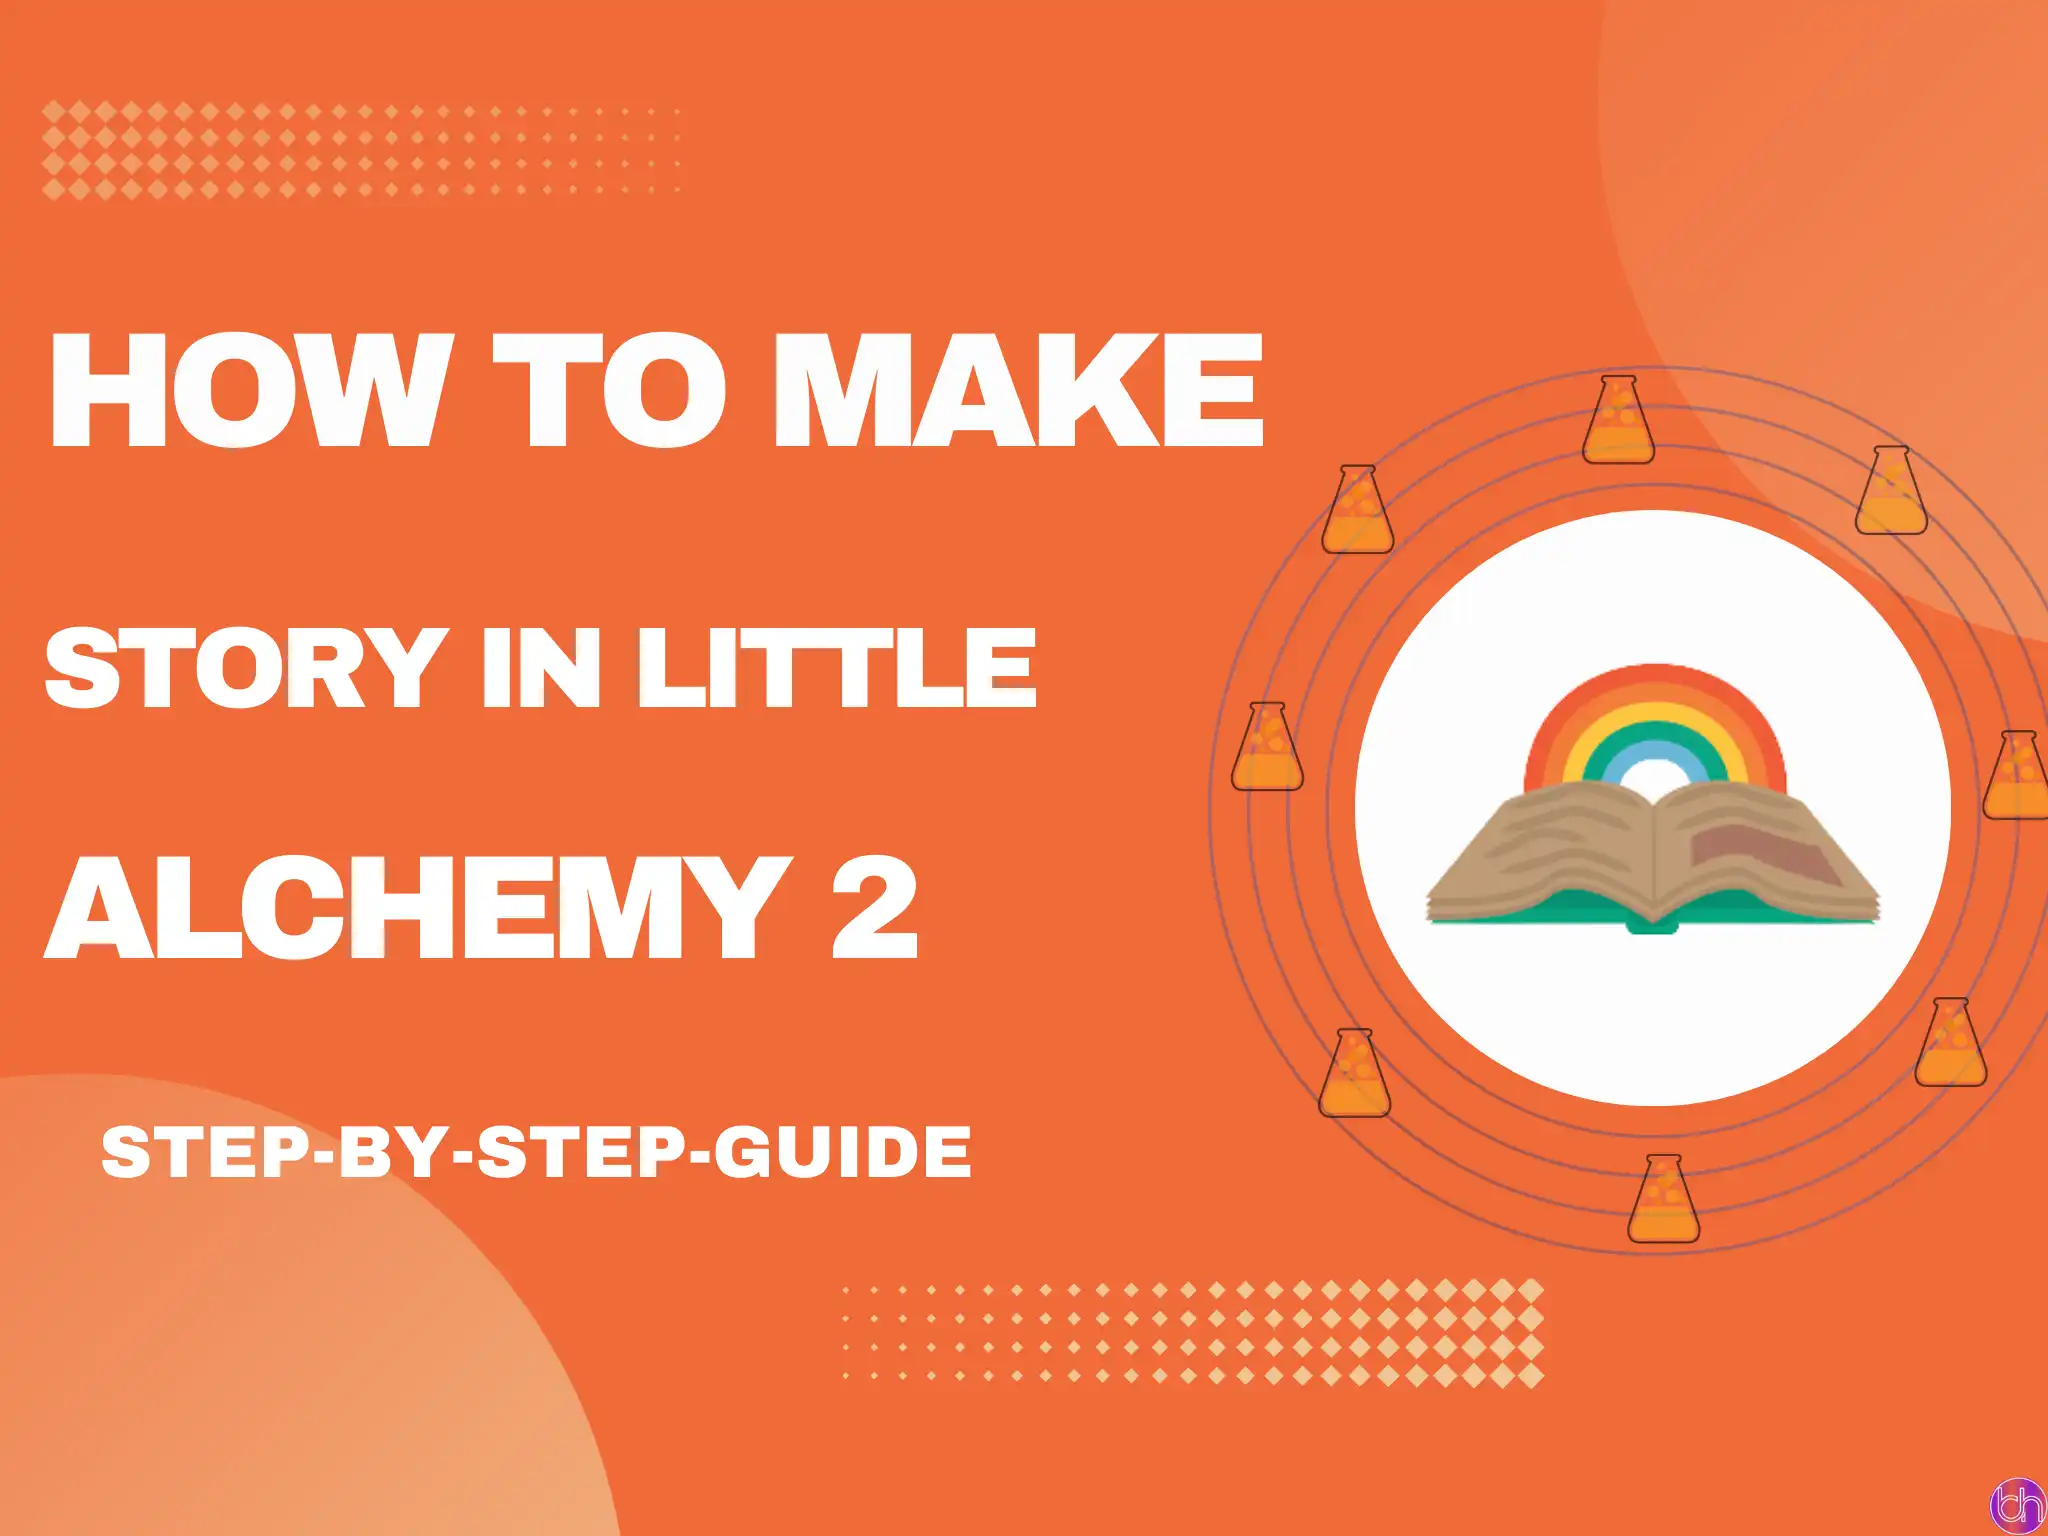 how to make story in little alchemy 2